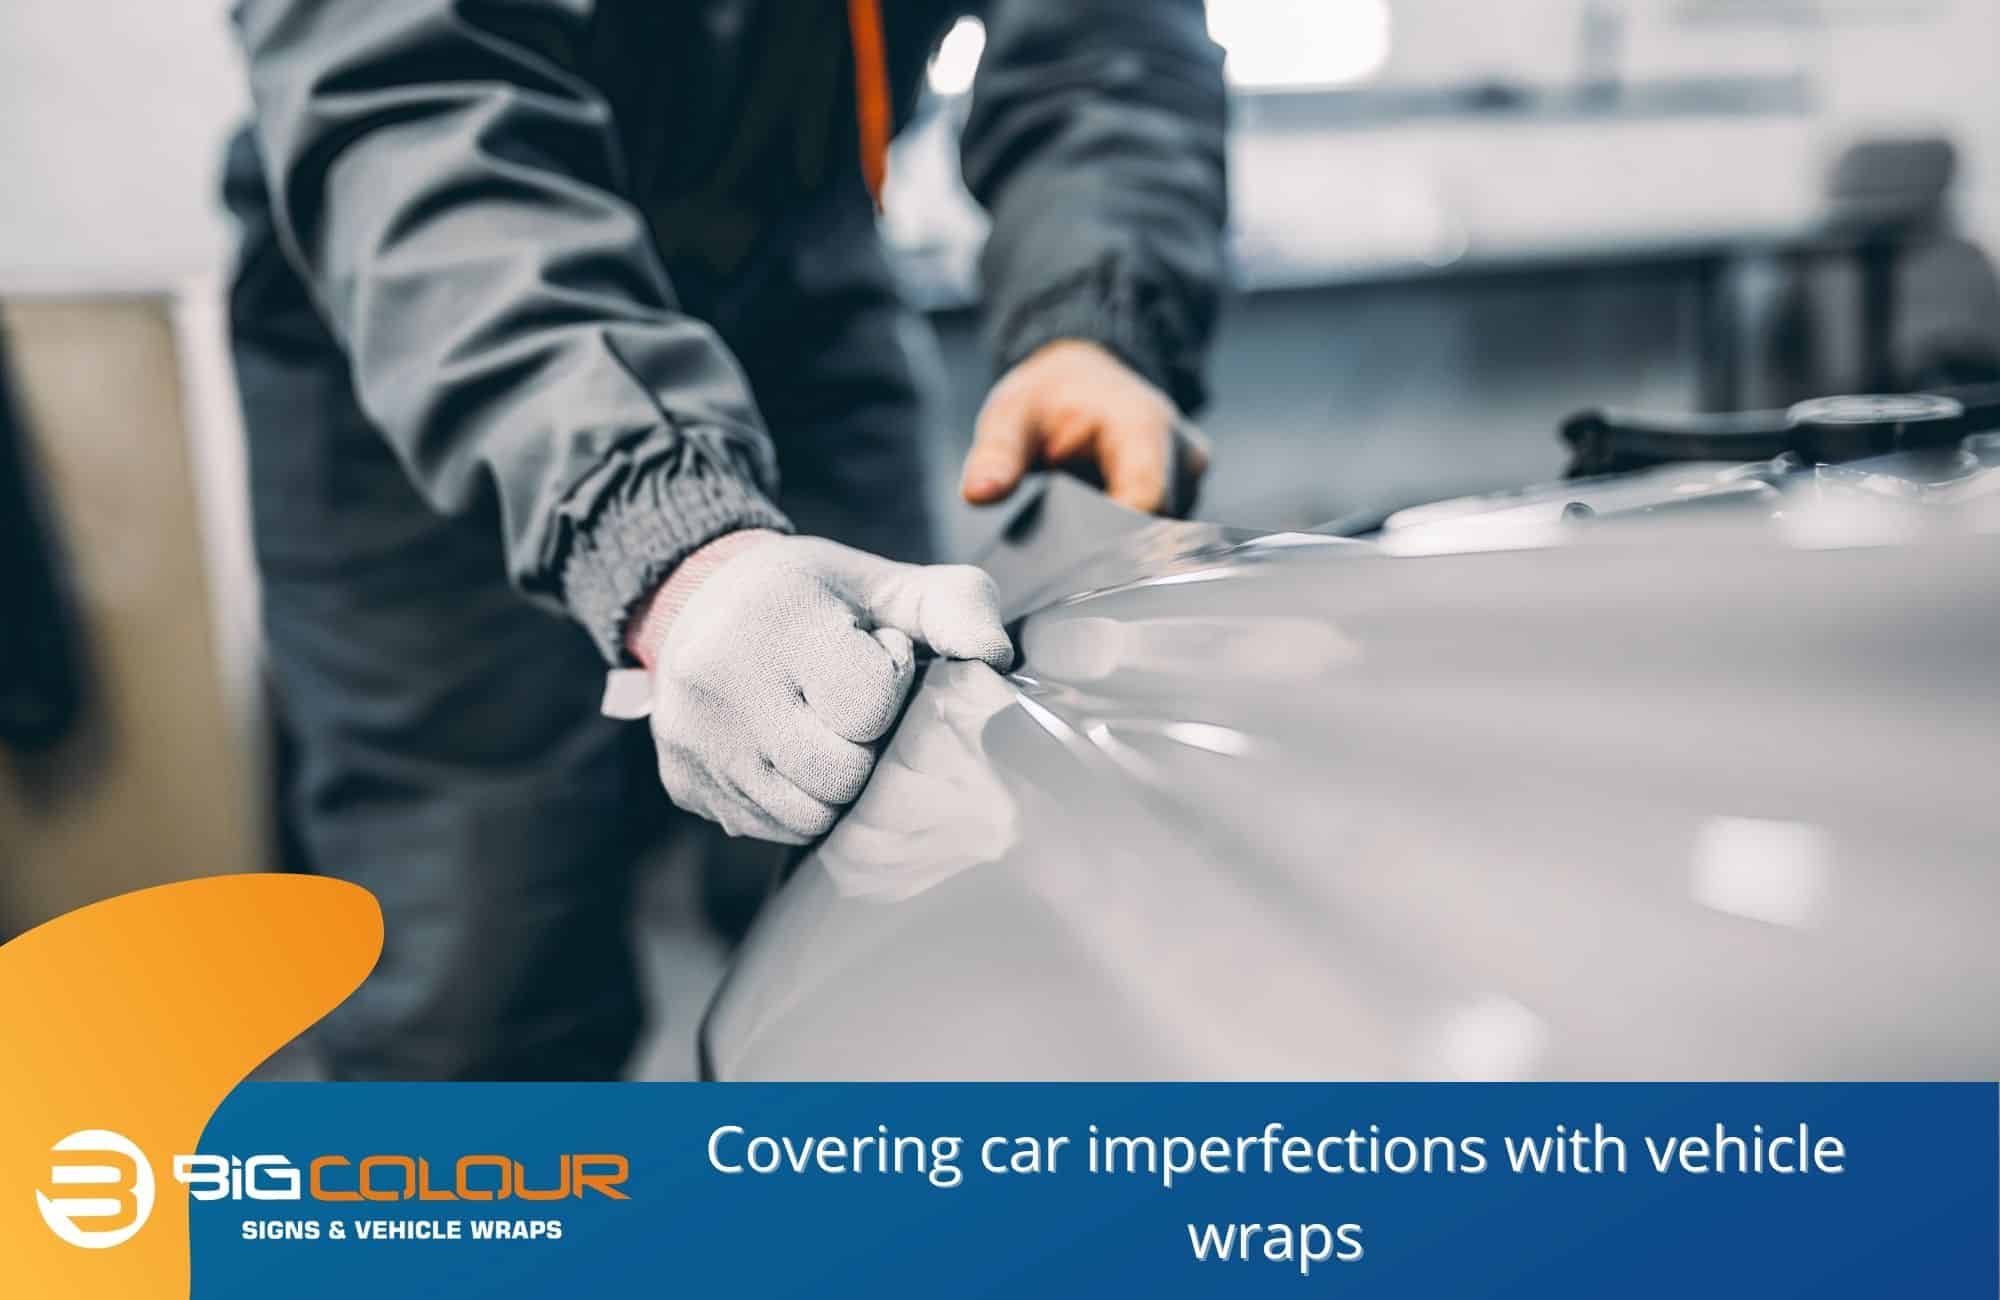 Covering car imperfections with vehicle wraps